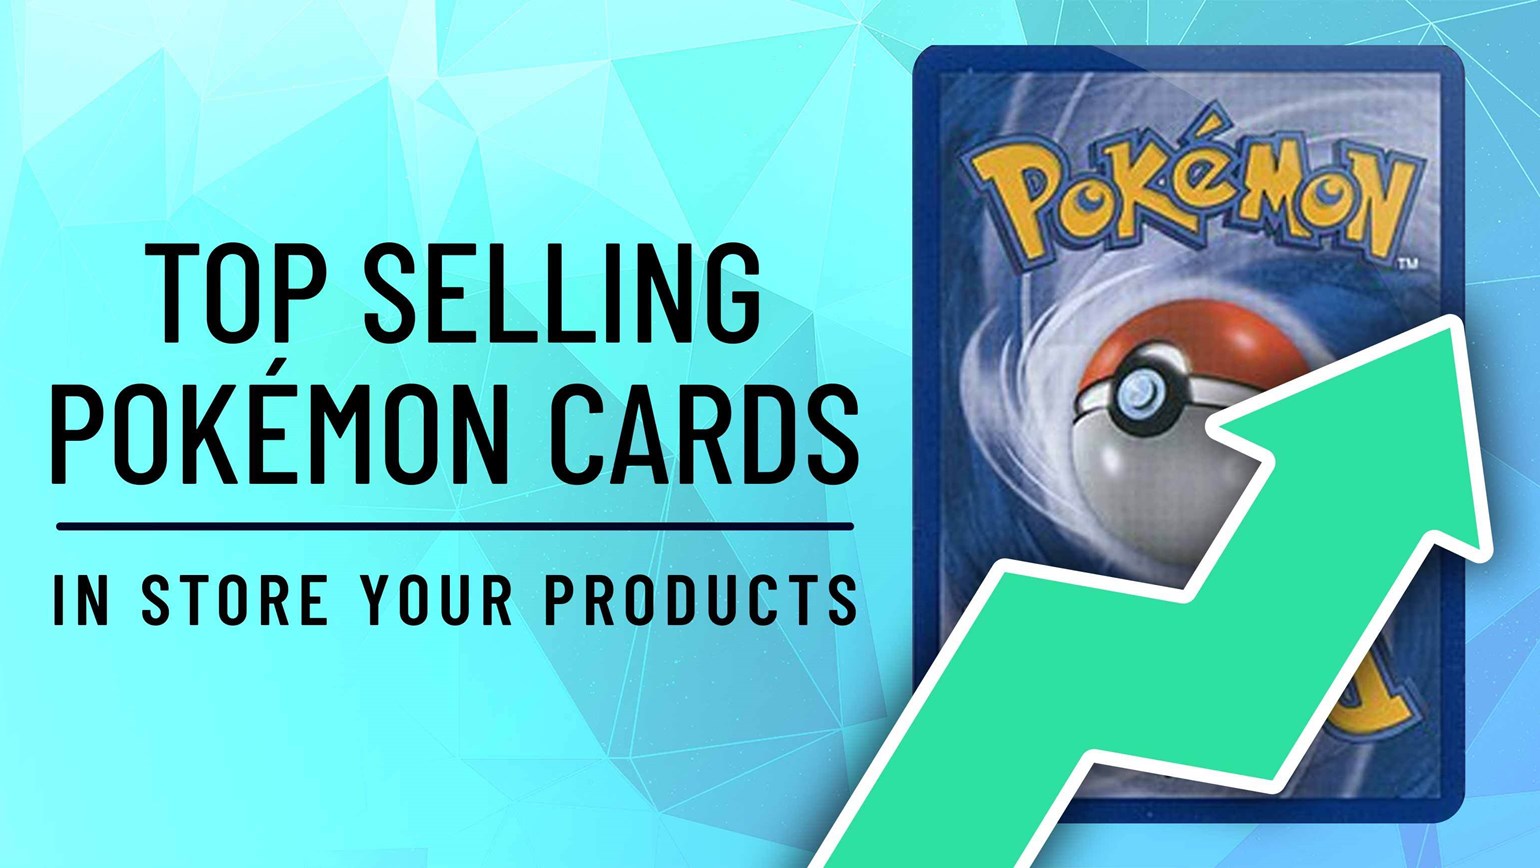 Top Selling Pokémon Cards in Store Your Products: June 2021